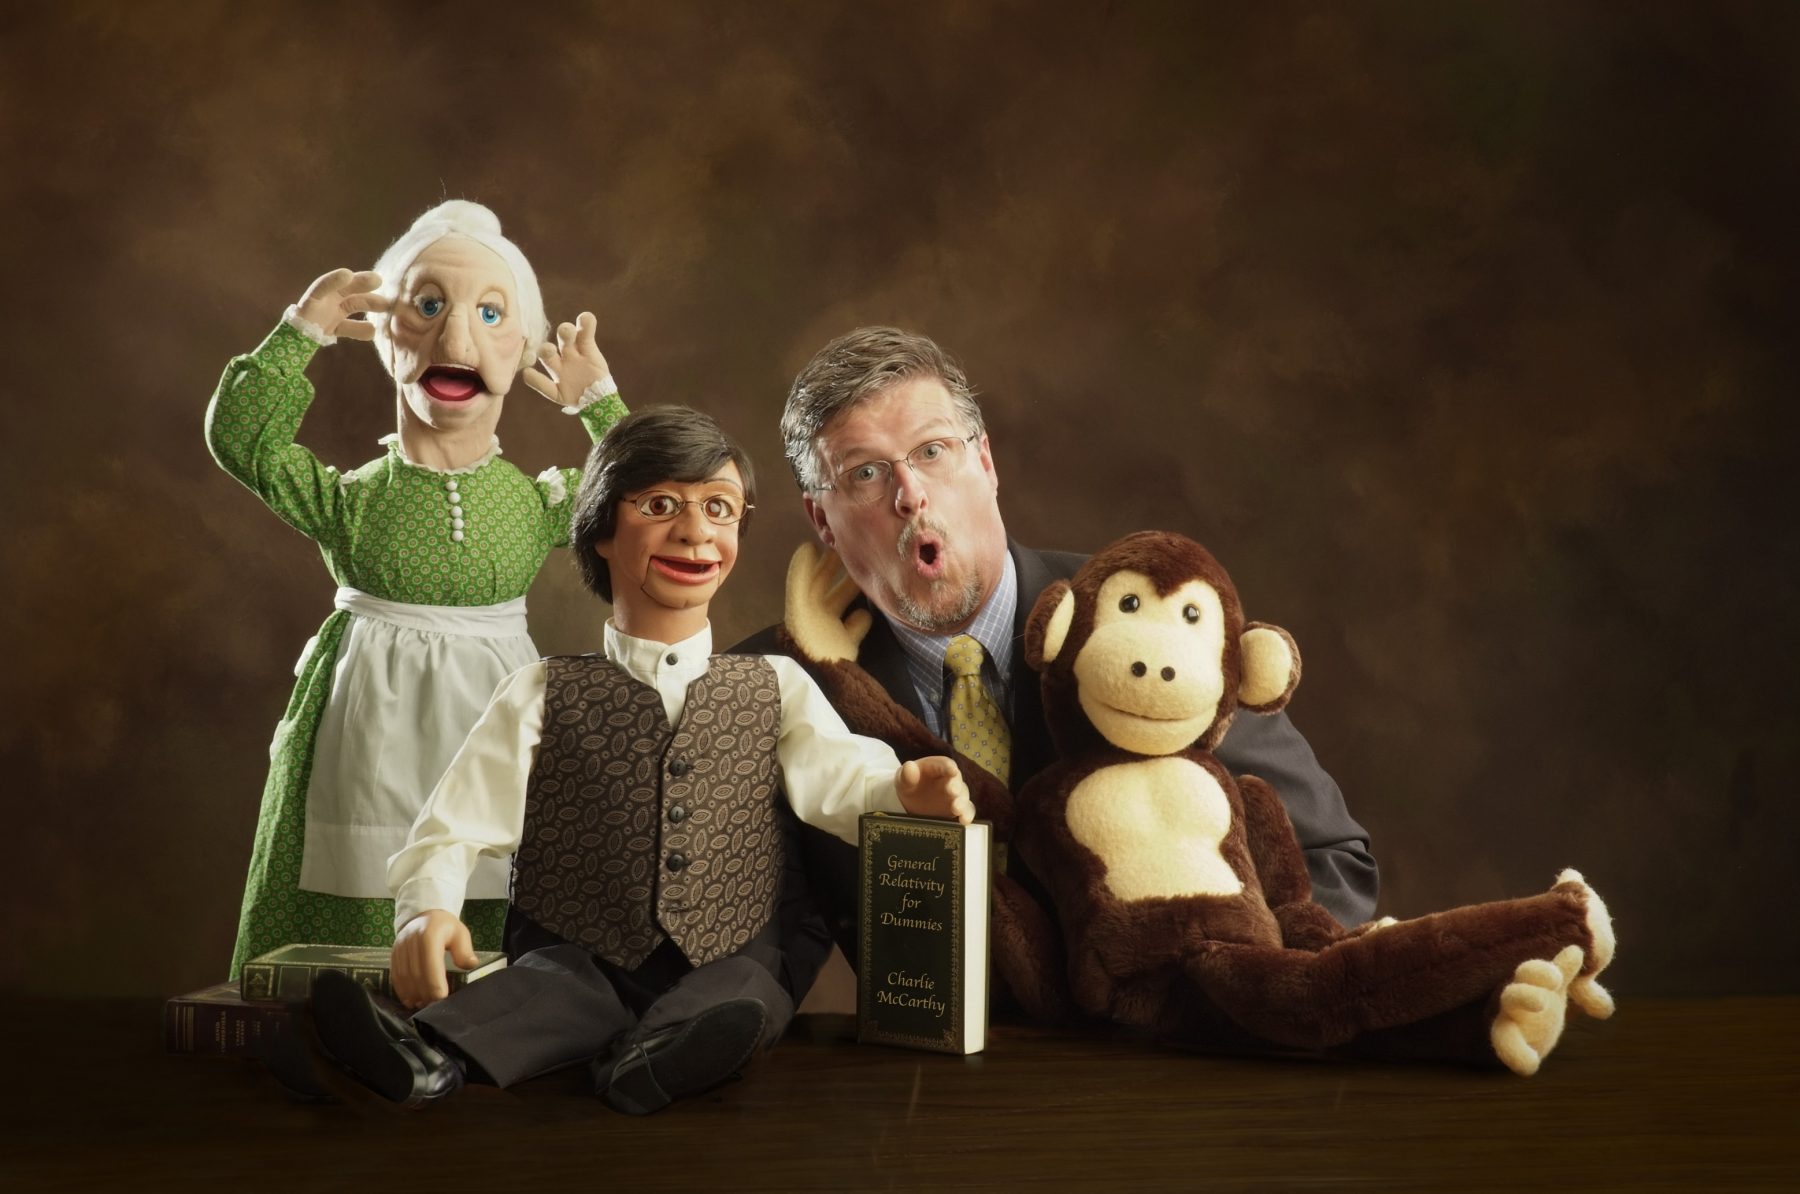 Ventriloquist poses with three puppets